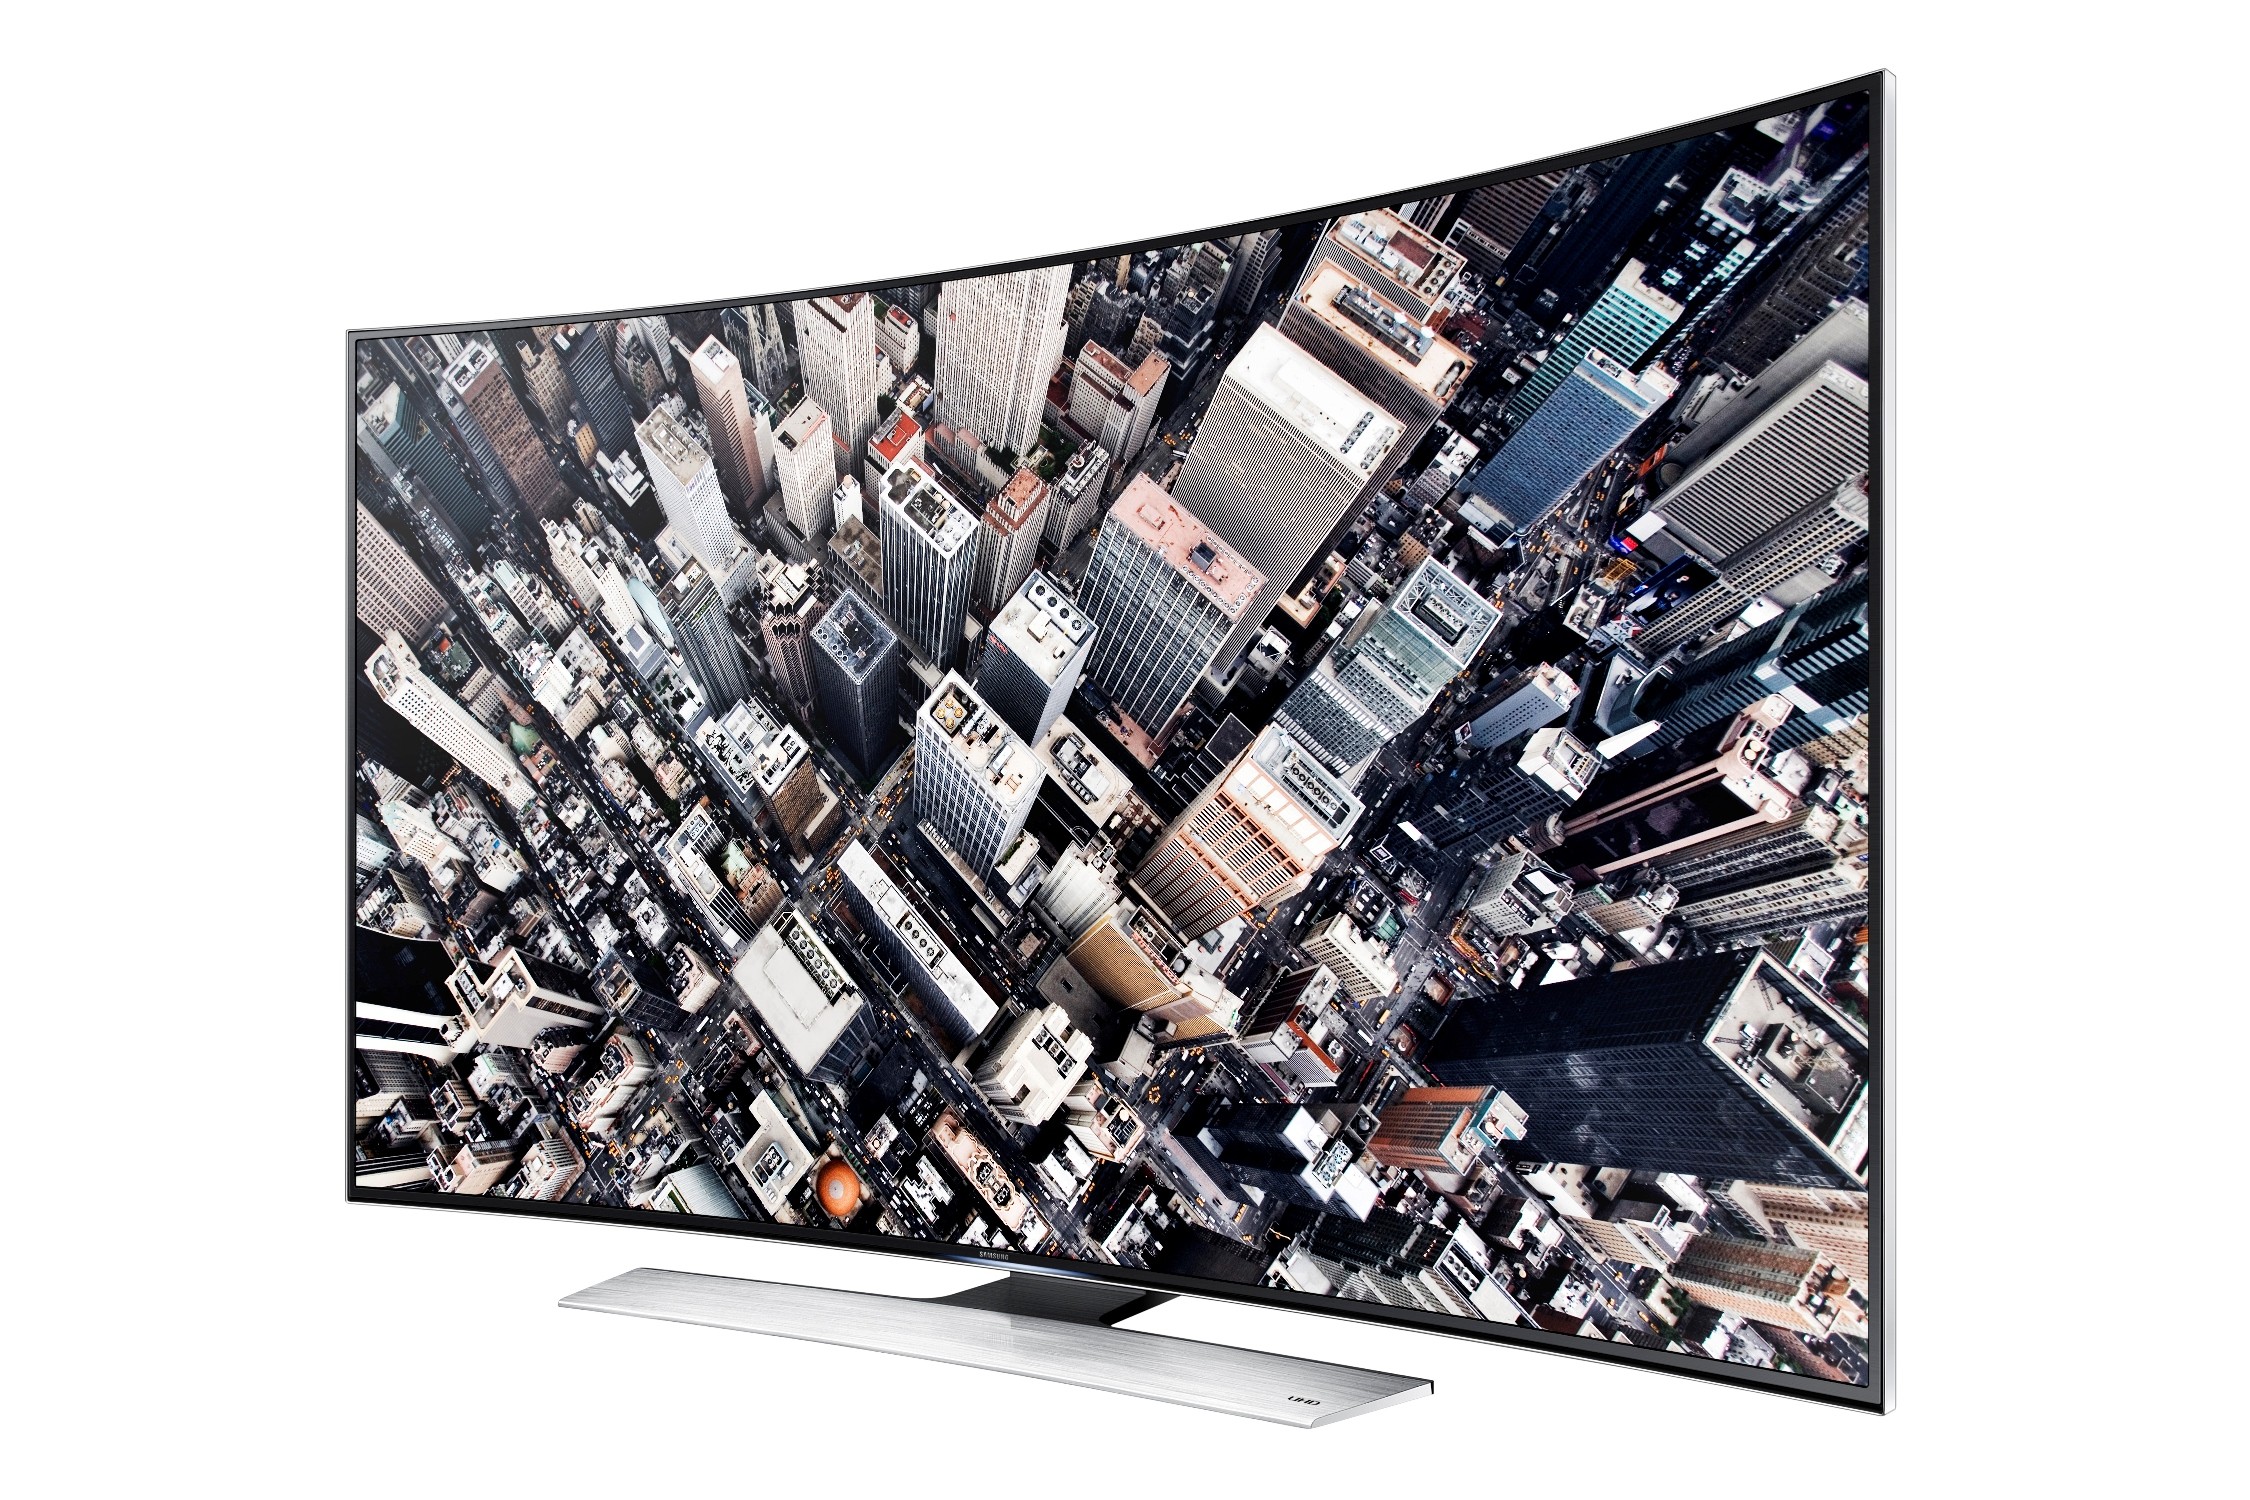 Samsung Launches Curved UHD TVs in Central Europe